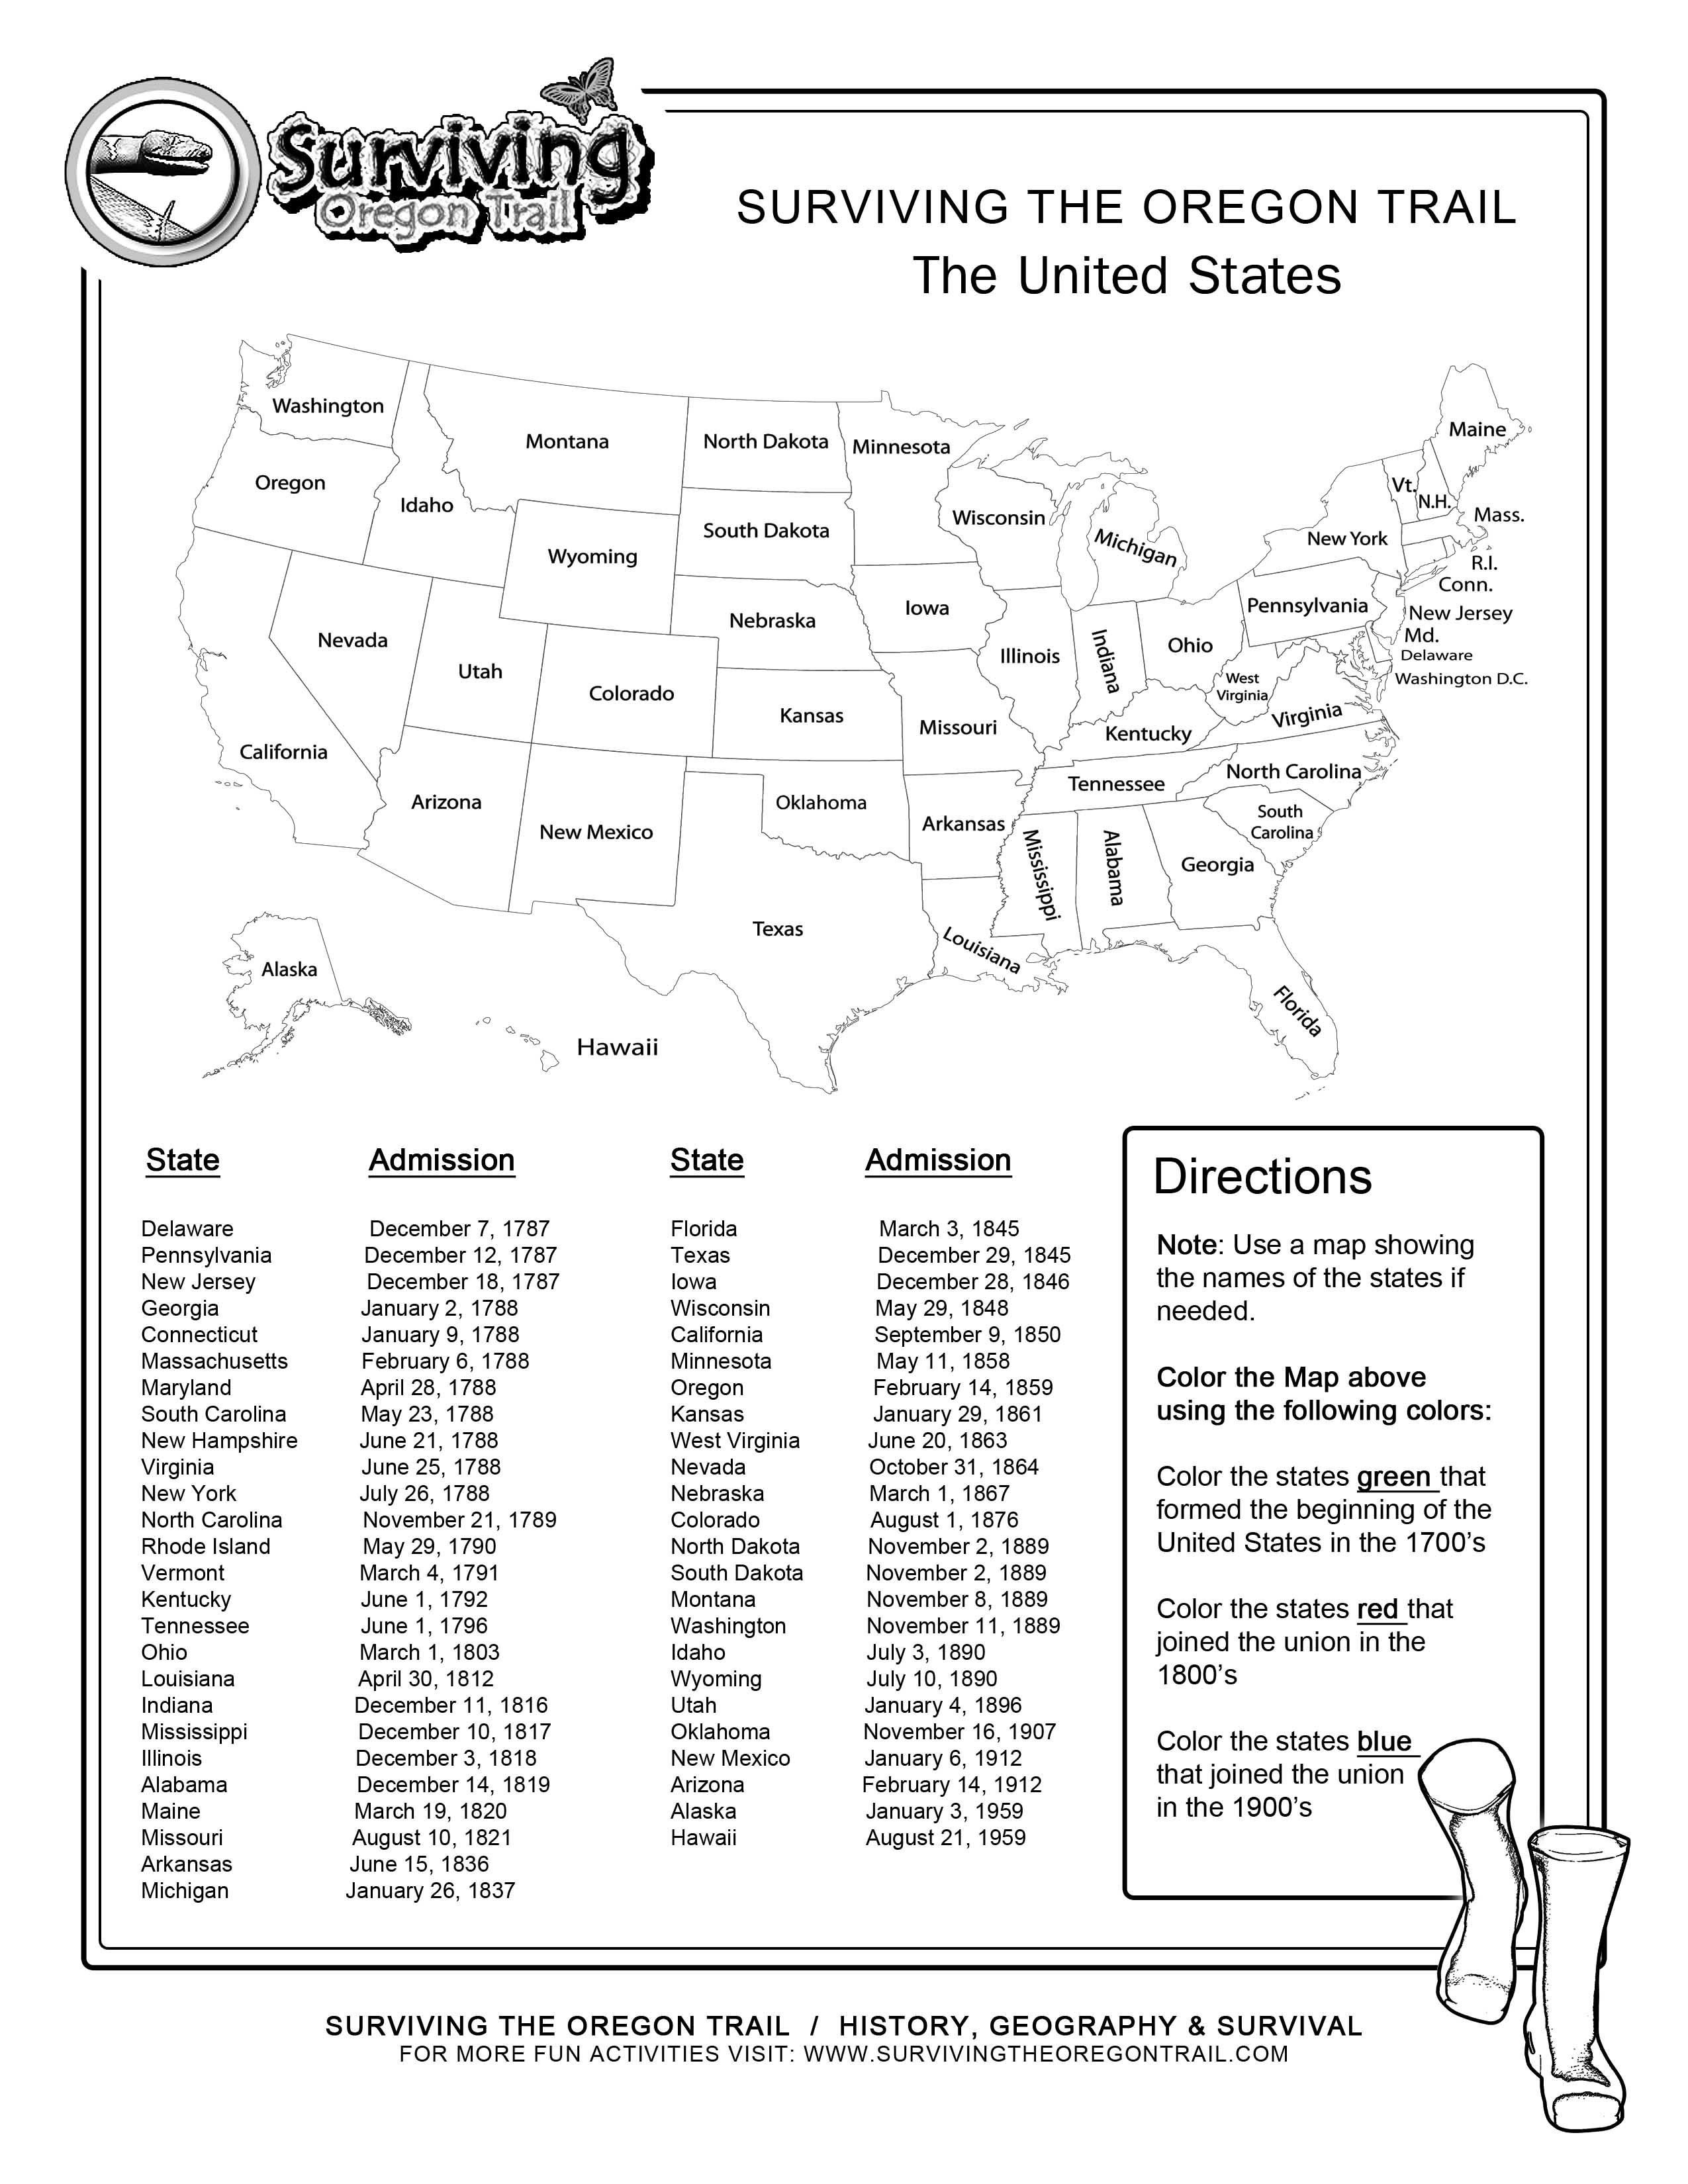 5th Grade Geography Worksheets 10 Best Kindergarten Geography Worksheets Images On Best